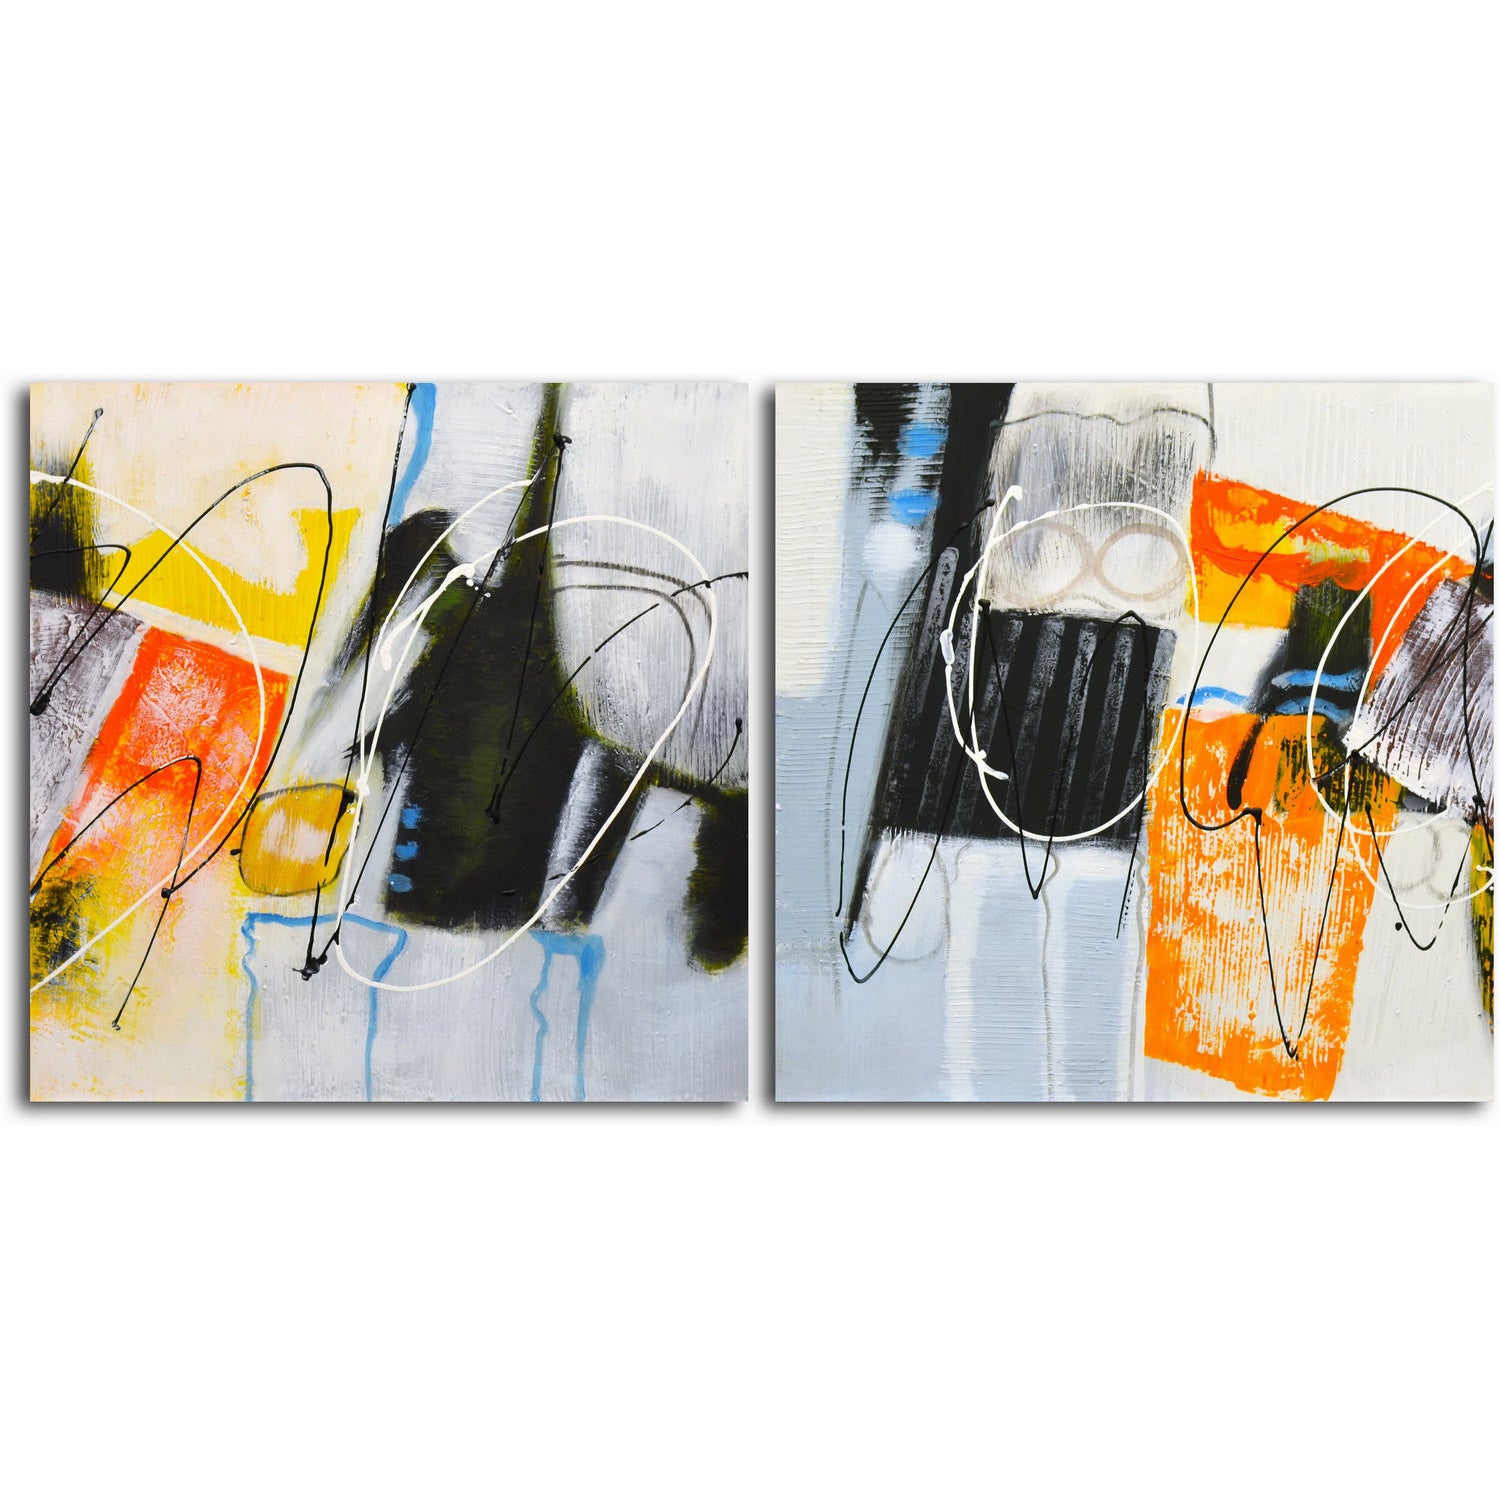 "Coloring Outside the Lines (I and II)" Original painting on canvas - Set of 2